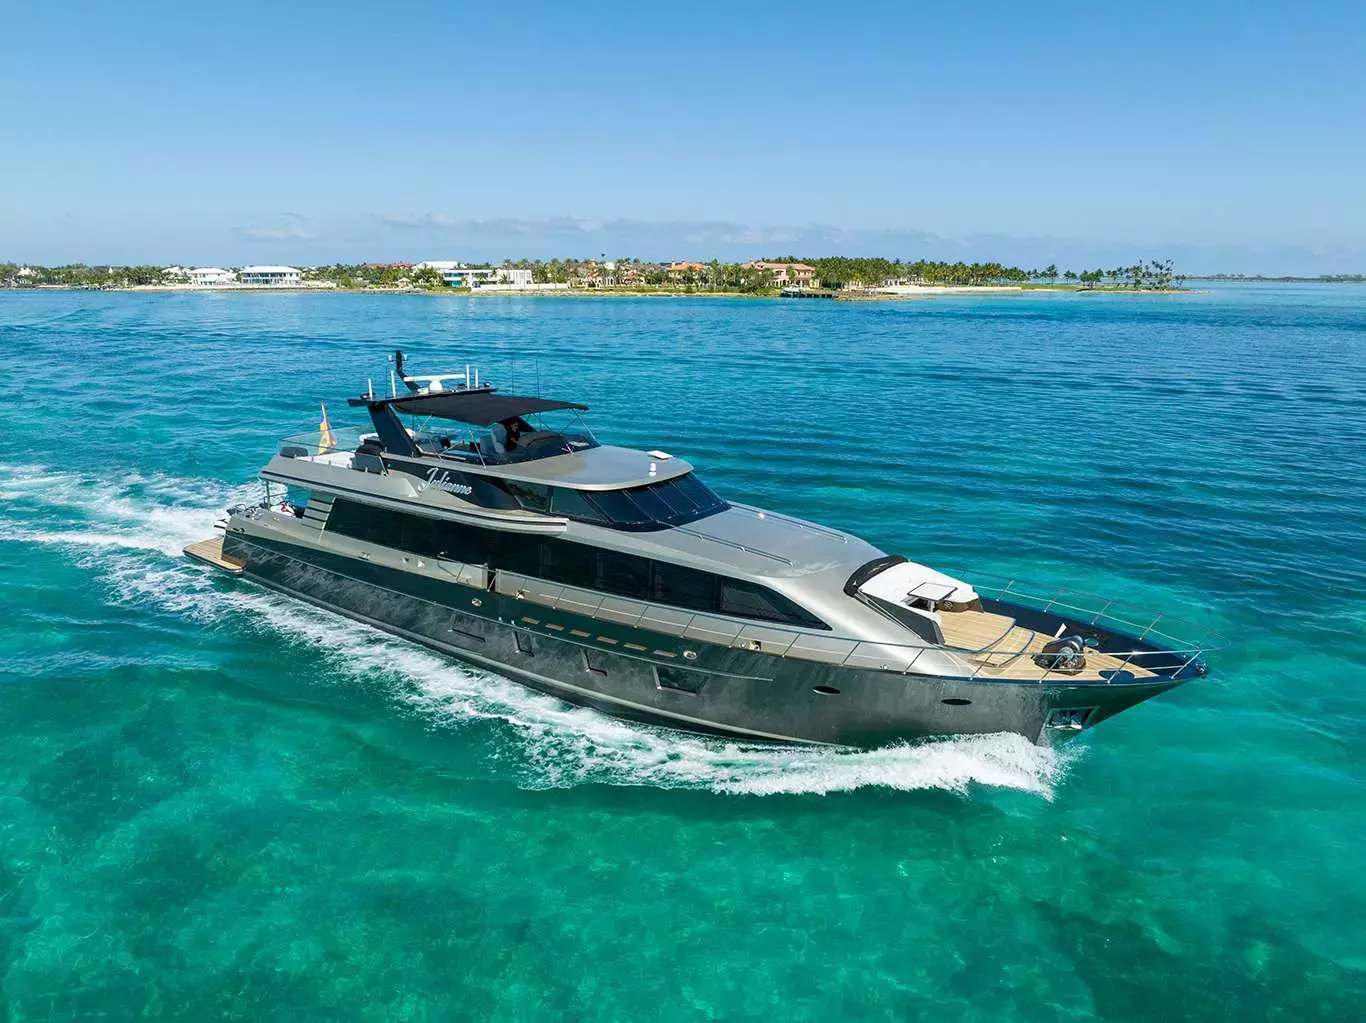 Julianne by Crescent Yachts - Top rates for a Charter of a private Motor Yacht in Bahamas